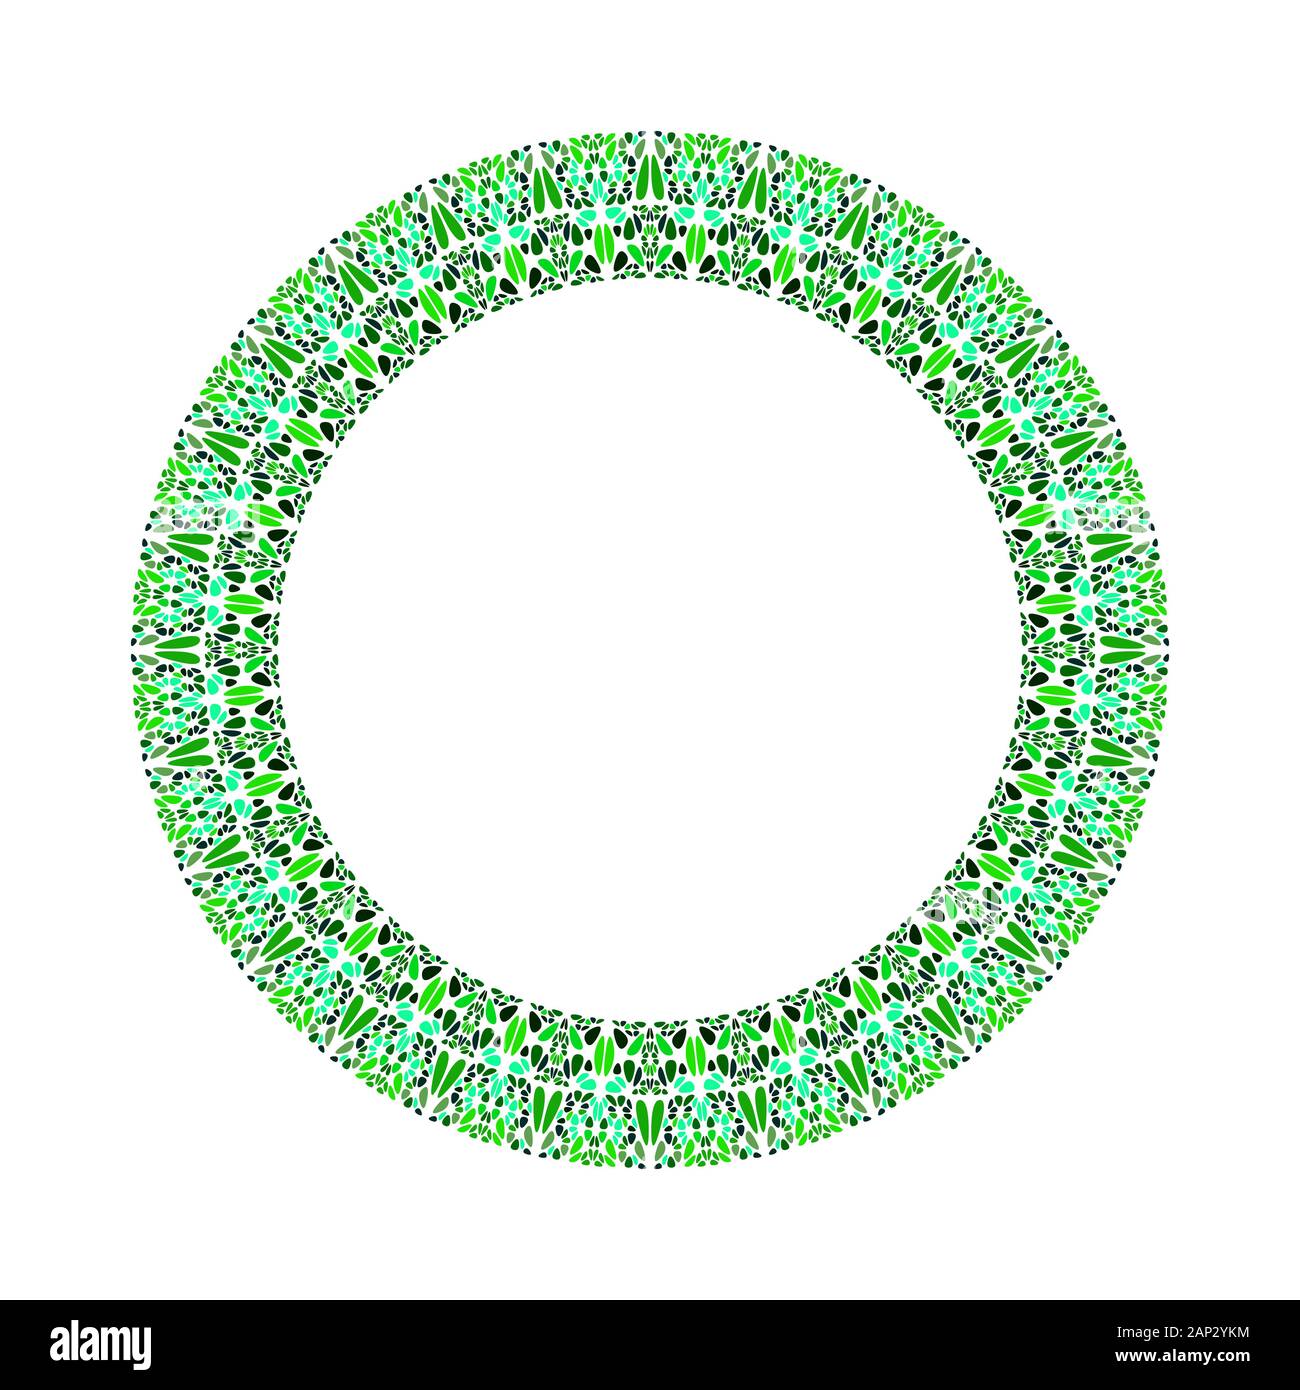 Geometrical floral frame - round circular vector design element on white background Stock Vector